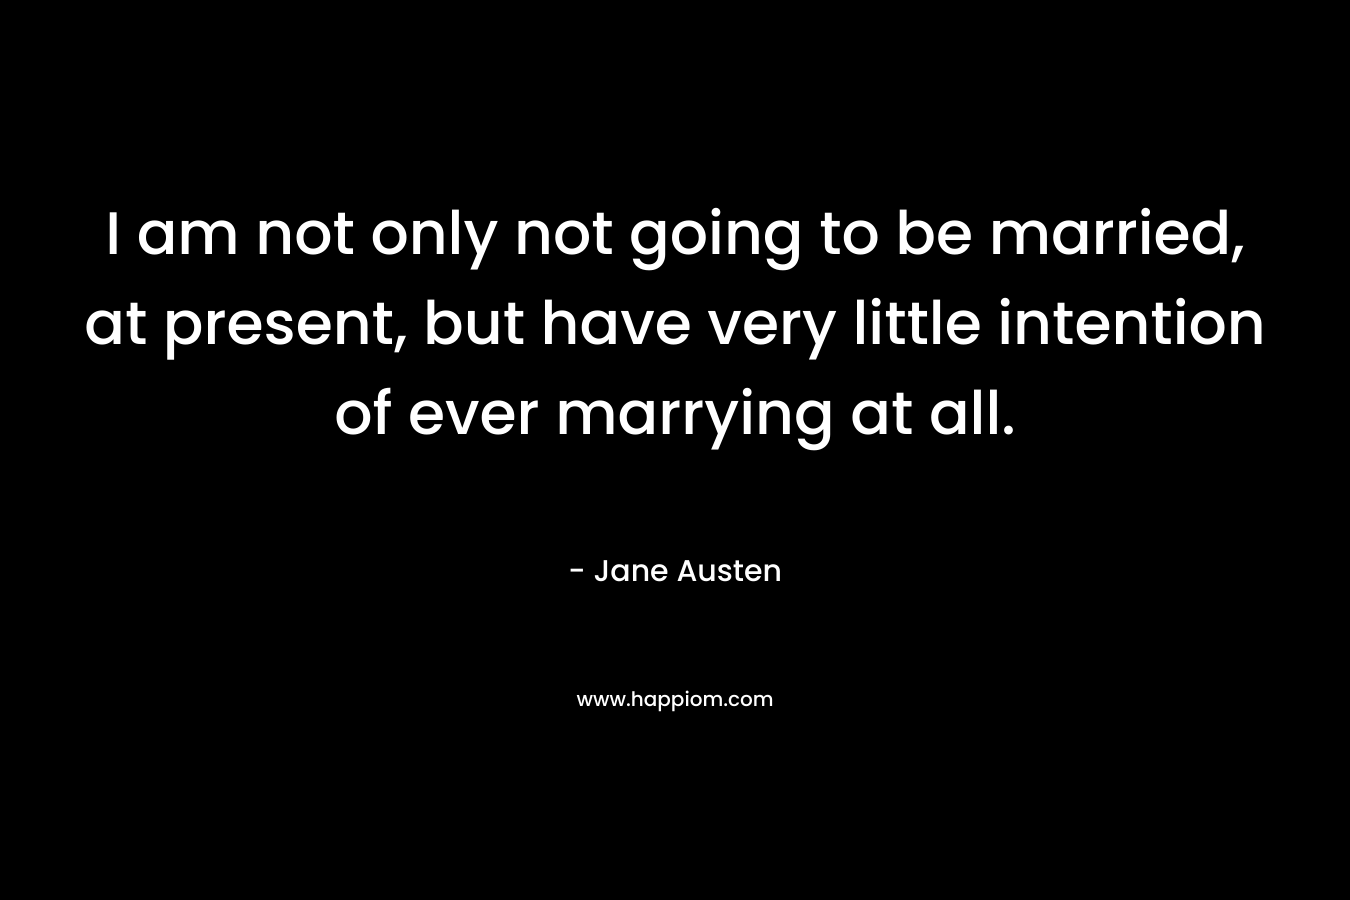 I am not only not going to be married, at present, but have very little intention of ever marrying at all.